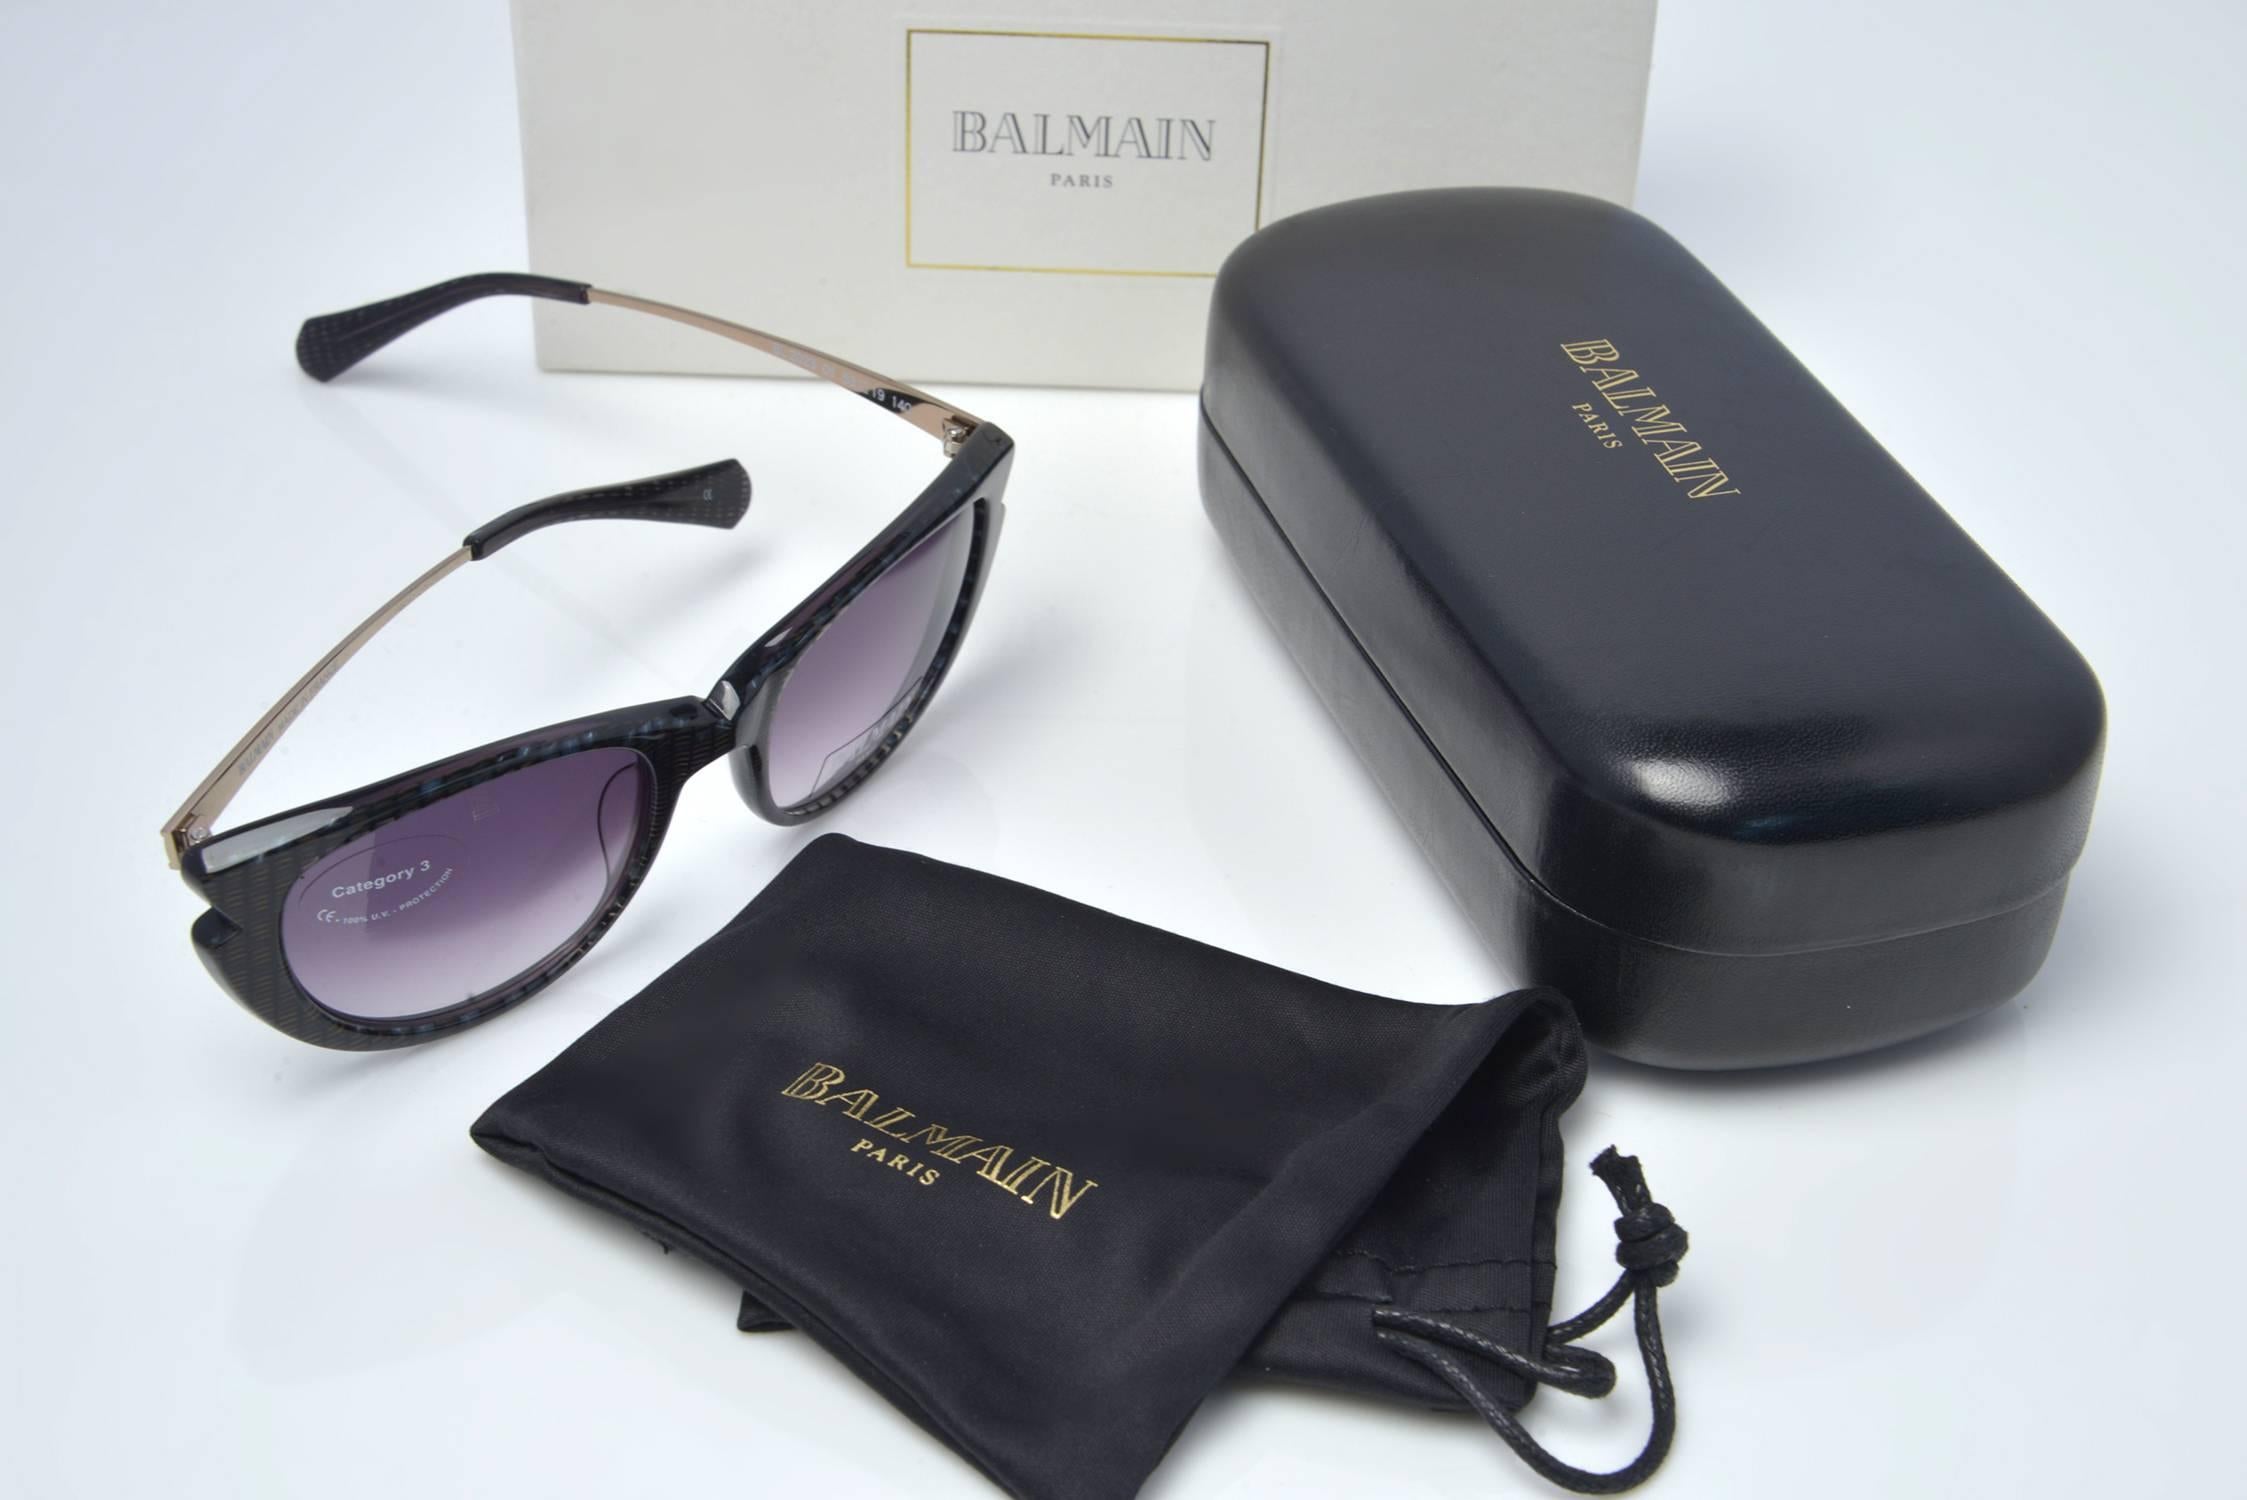 Balmain Paris cat eye sunglasses with case and original box. The main frames are a grey-clear hue with black stripes. The temples are a gold tone metal with the logo.  Lenses are a grey gradient. Also included in the set is a protective pouch, along